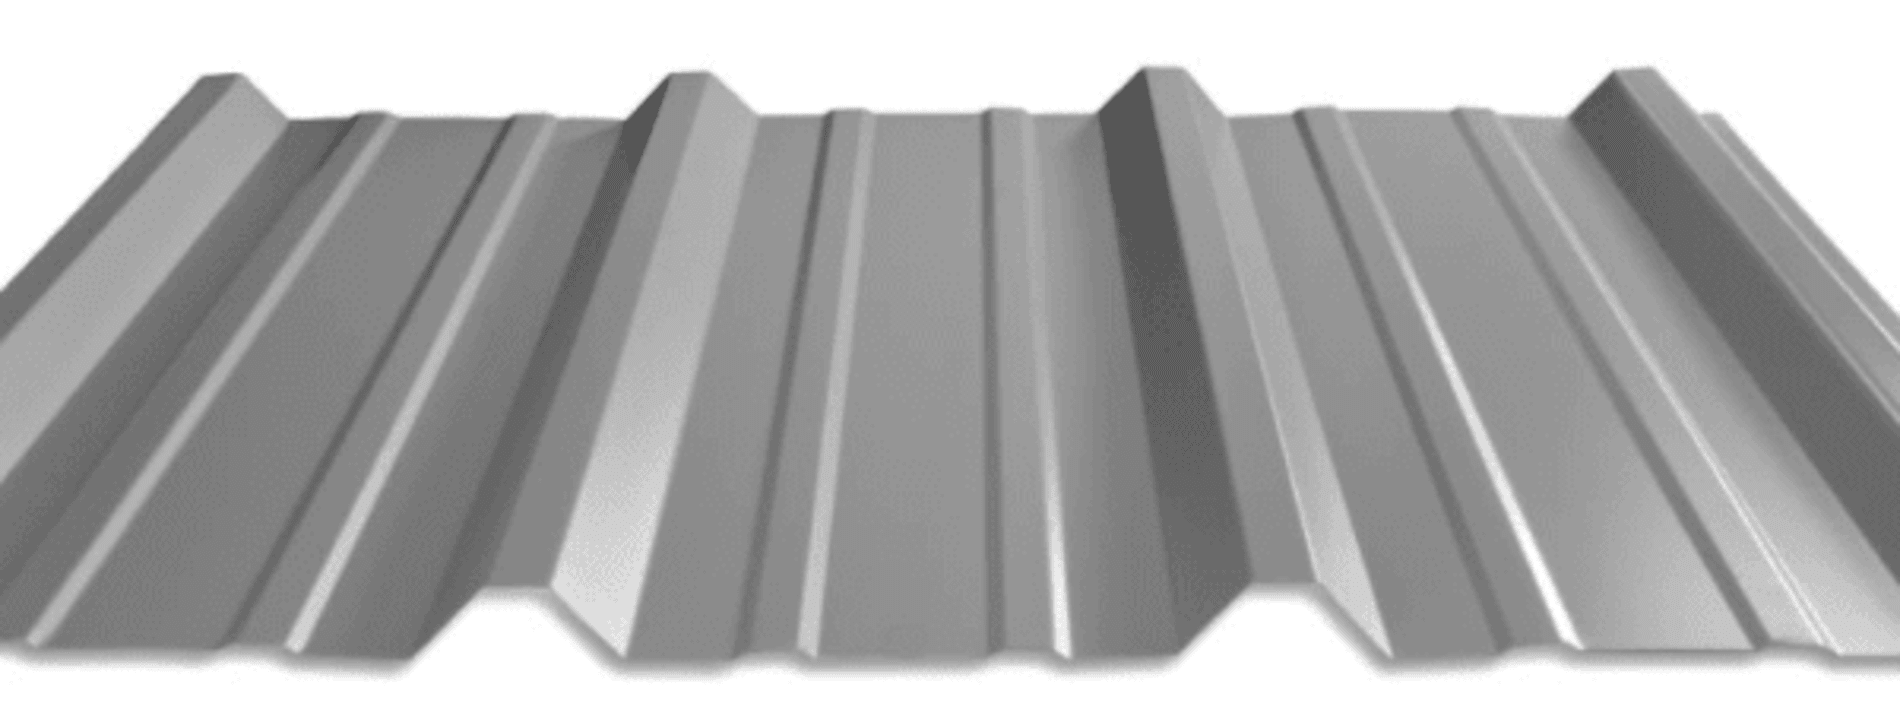 Through-fastened Metal Roofing